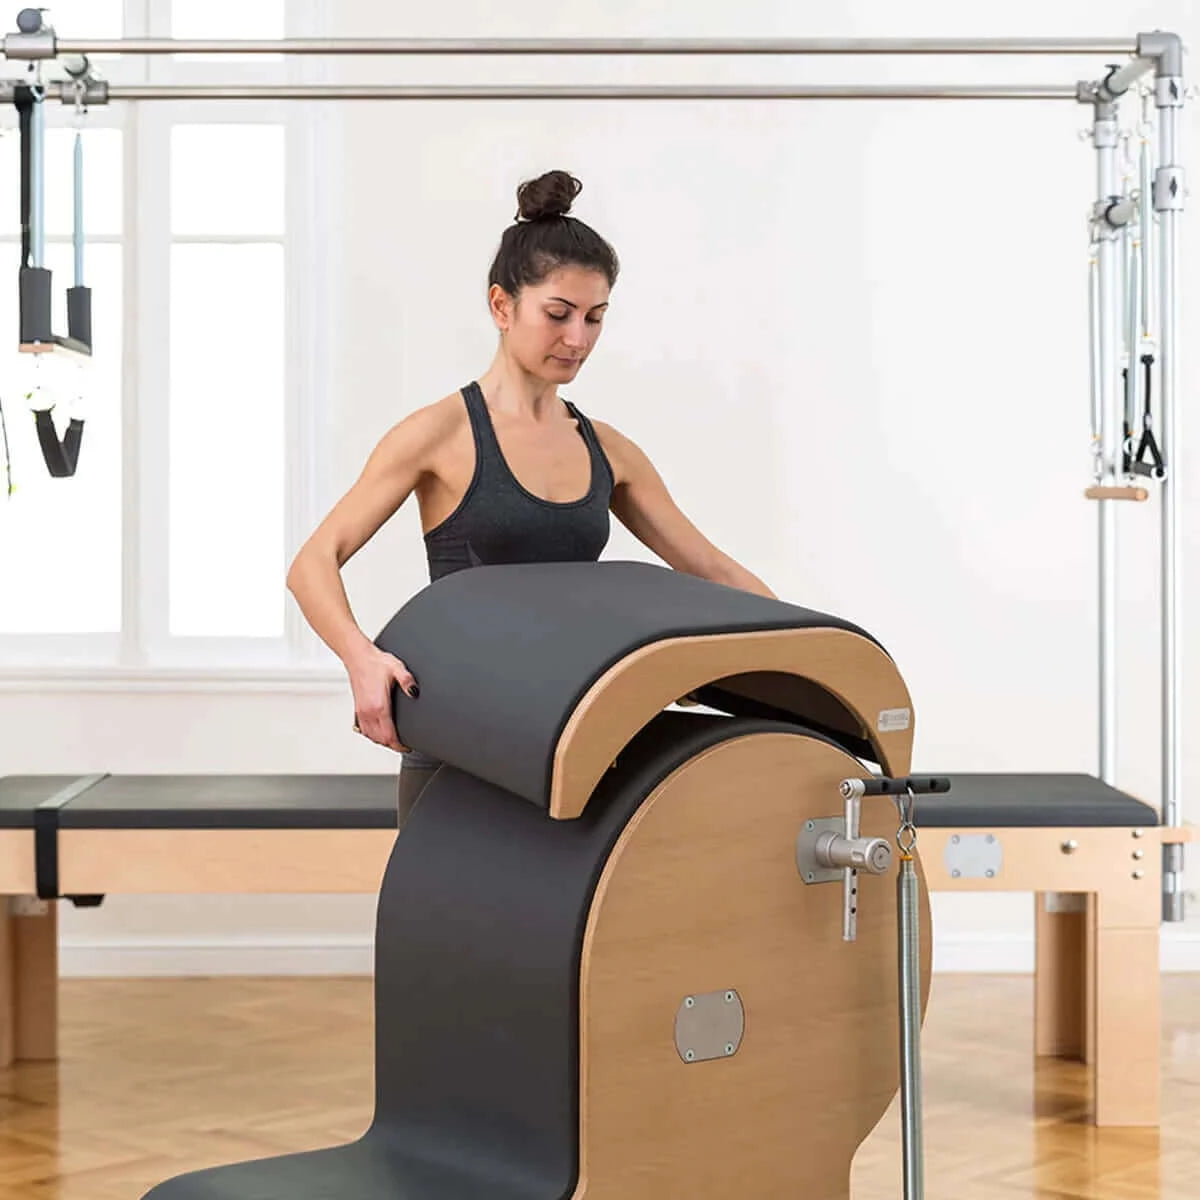 Anthacite Grey BASI Systems Pilates Arm Chair Barrel Set by BASI Systems sold by Pilates Matters® by BSP LLC